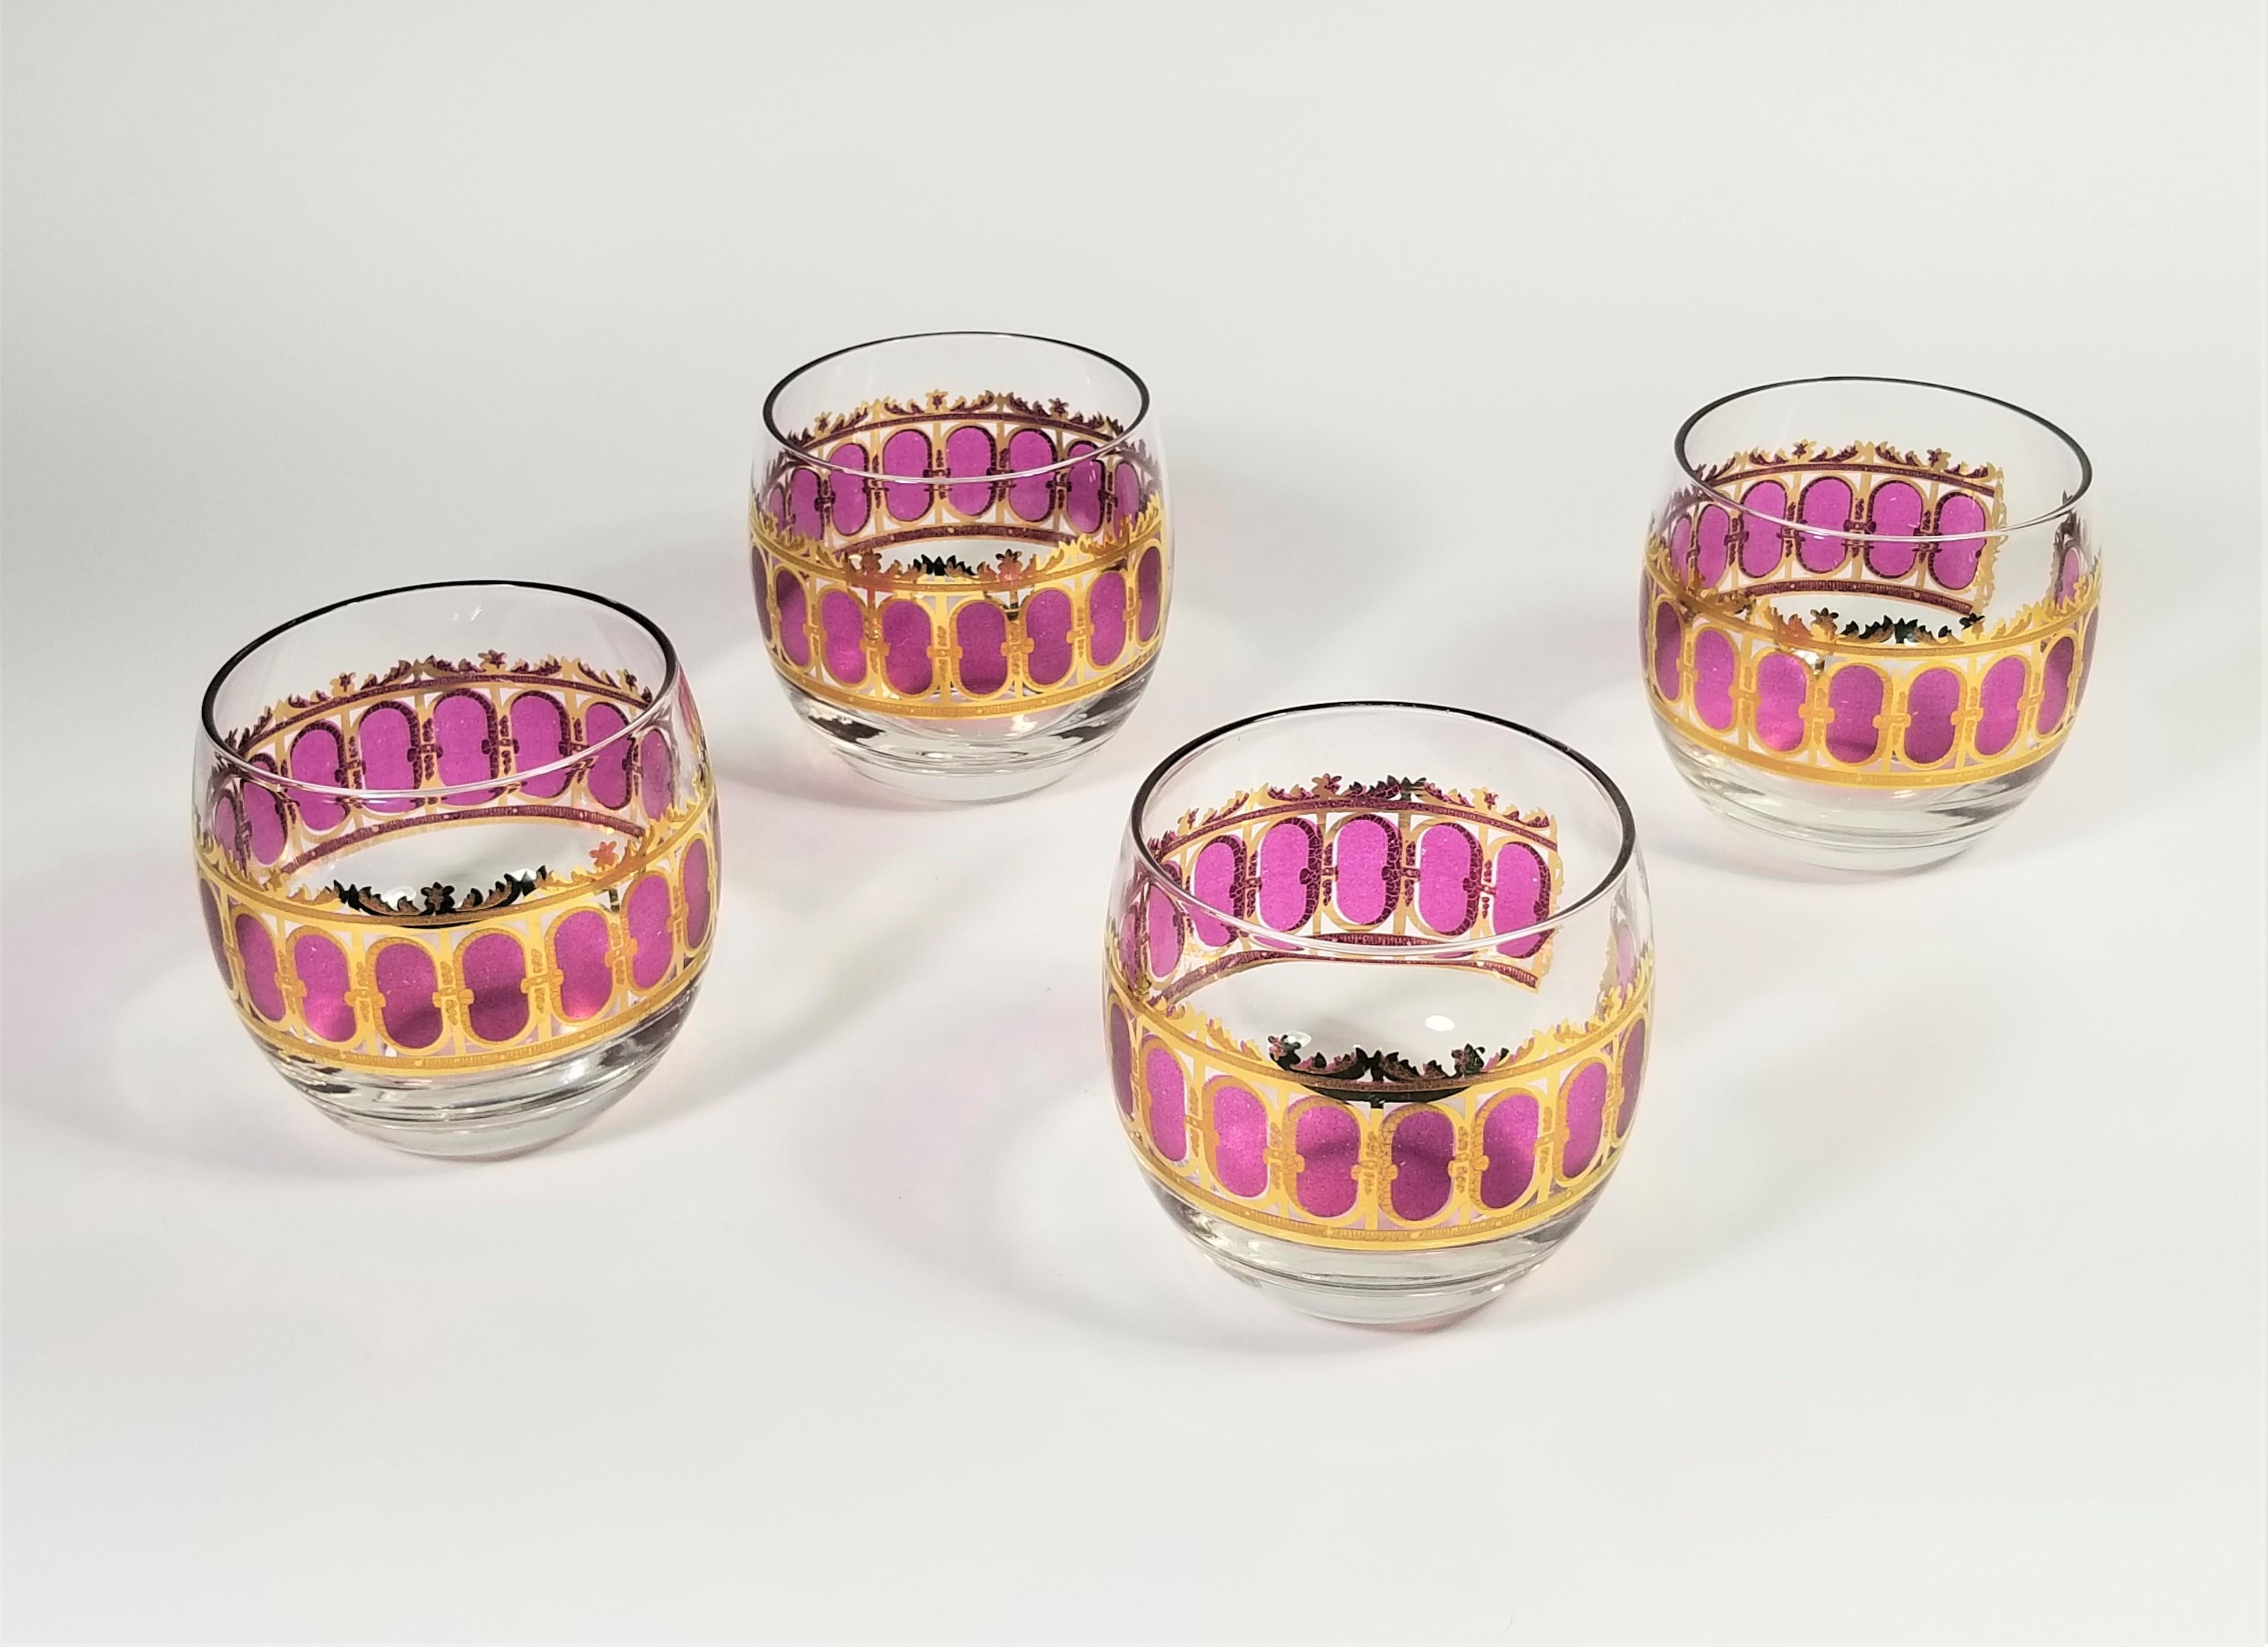 Midcentury 1960s Culver 22K Gold Glassware Barware. Large Size Roly Poly Glasses. Set of 4. All glasses are signed.